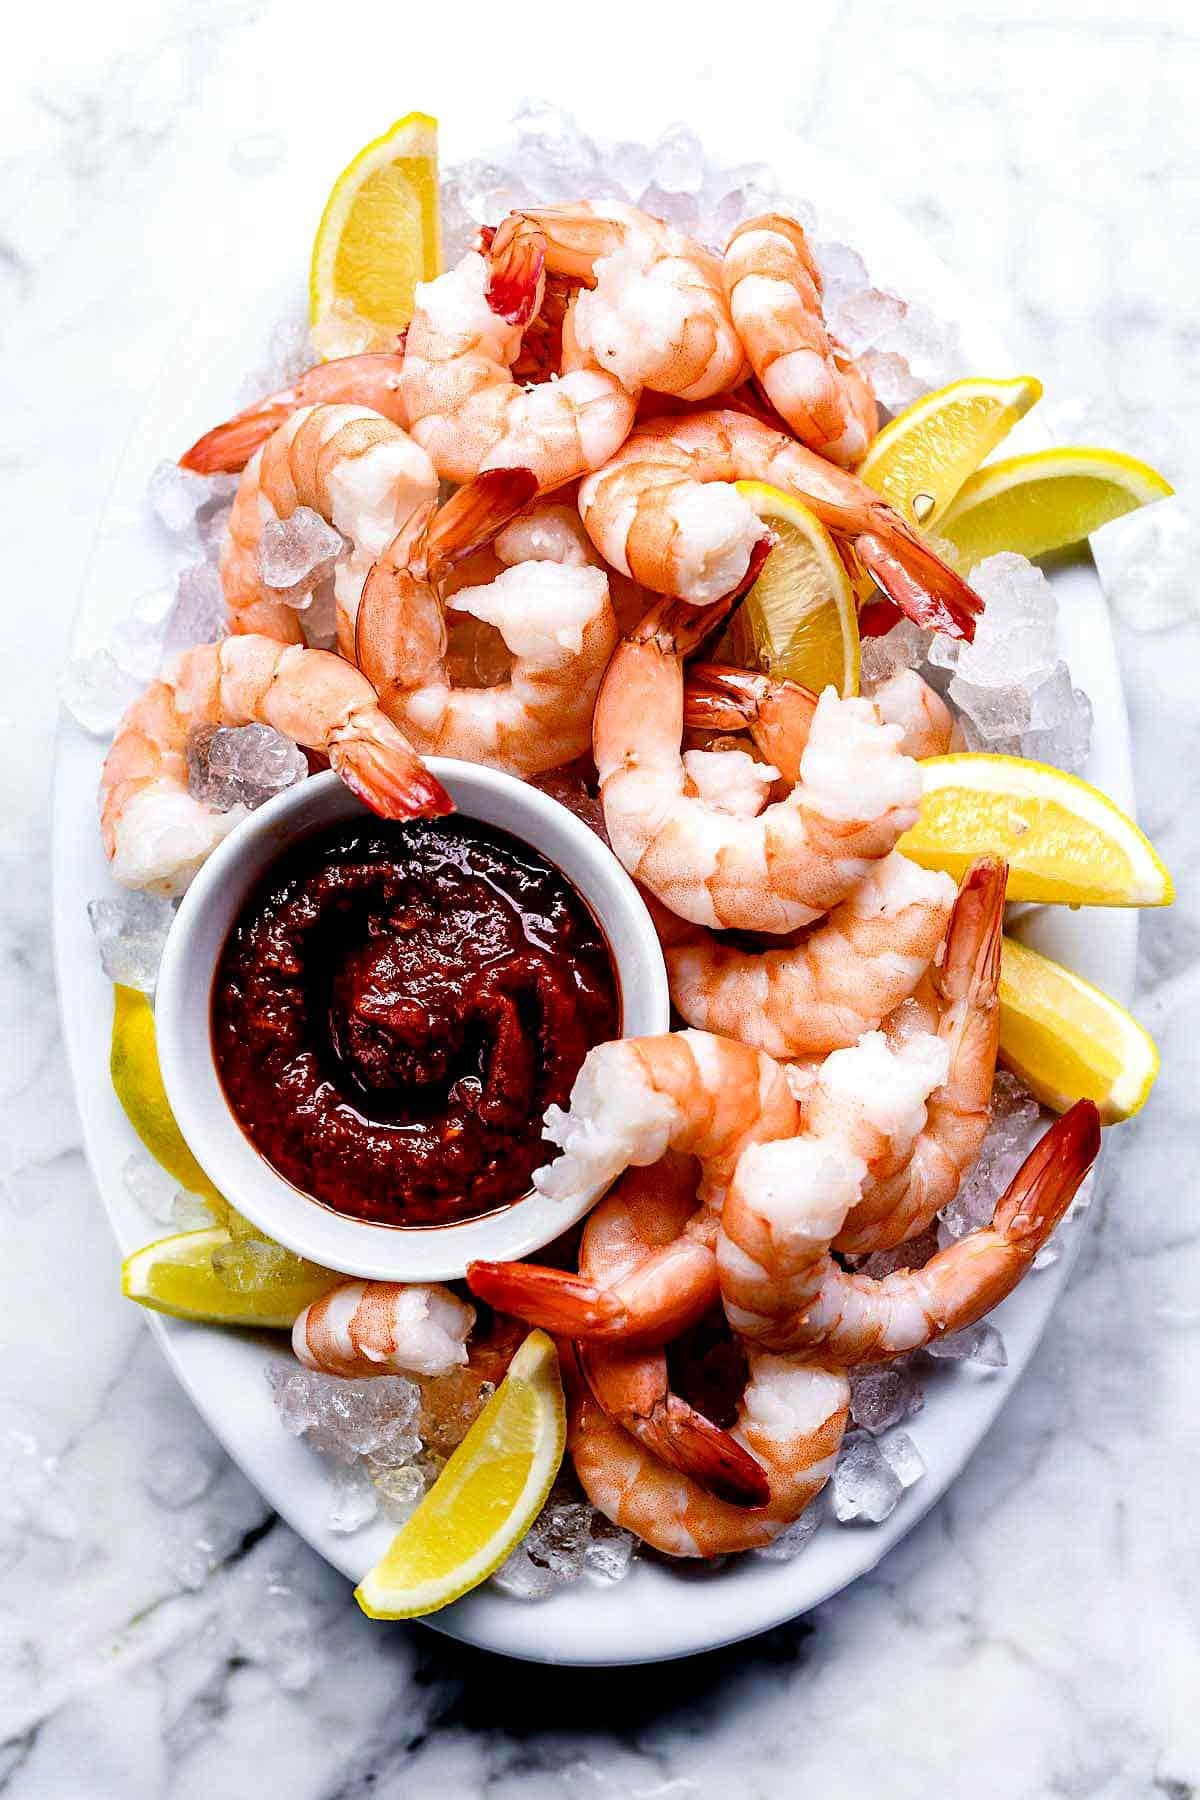 Boiled shrimp with red sauce and sliced lemon on top of ice. 